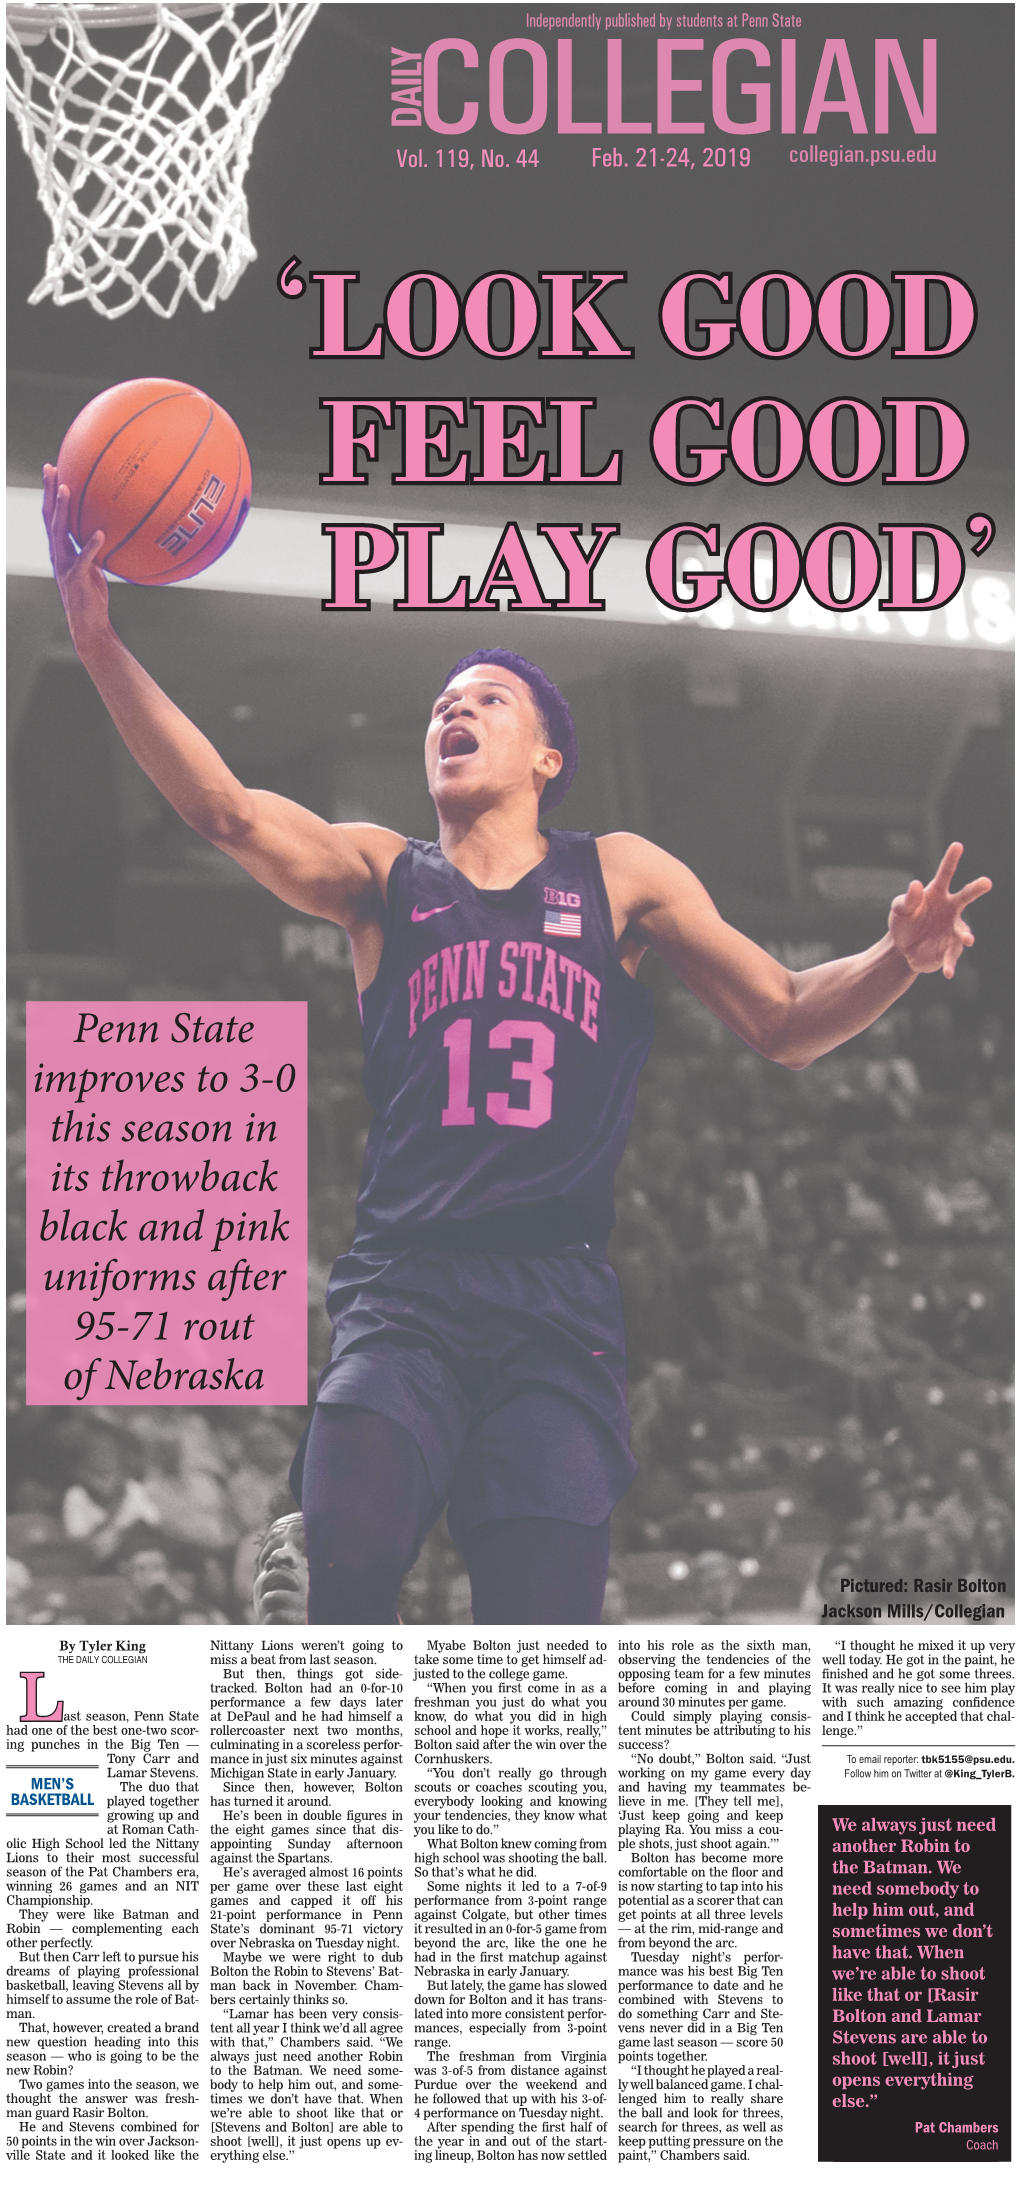 Penn State Improves to 3-0 This Season in Its Throwback Black and Pink Uniforms After 95-71 Rout of Nebraska